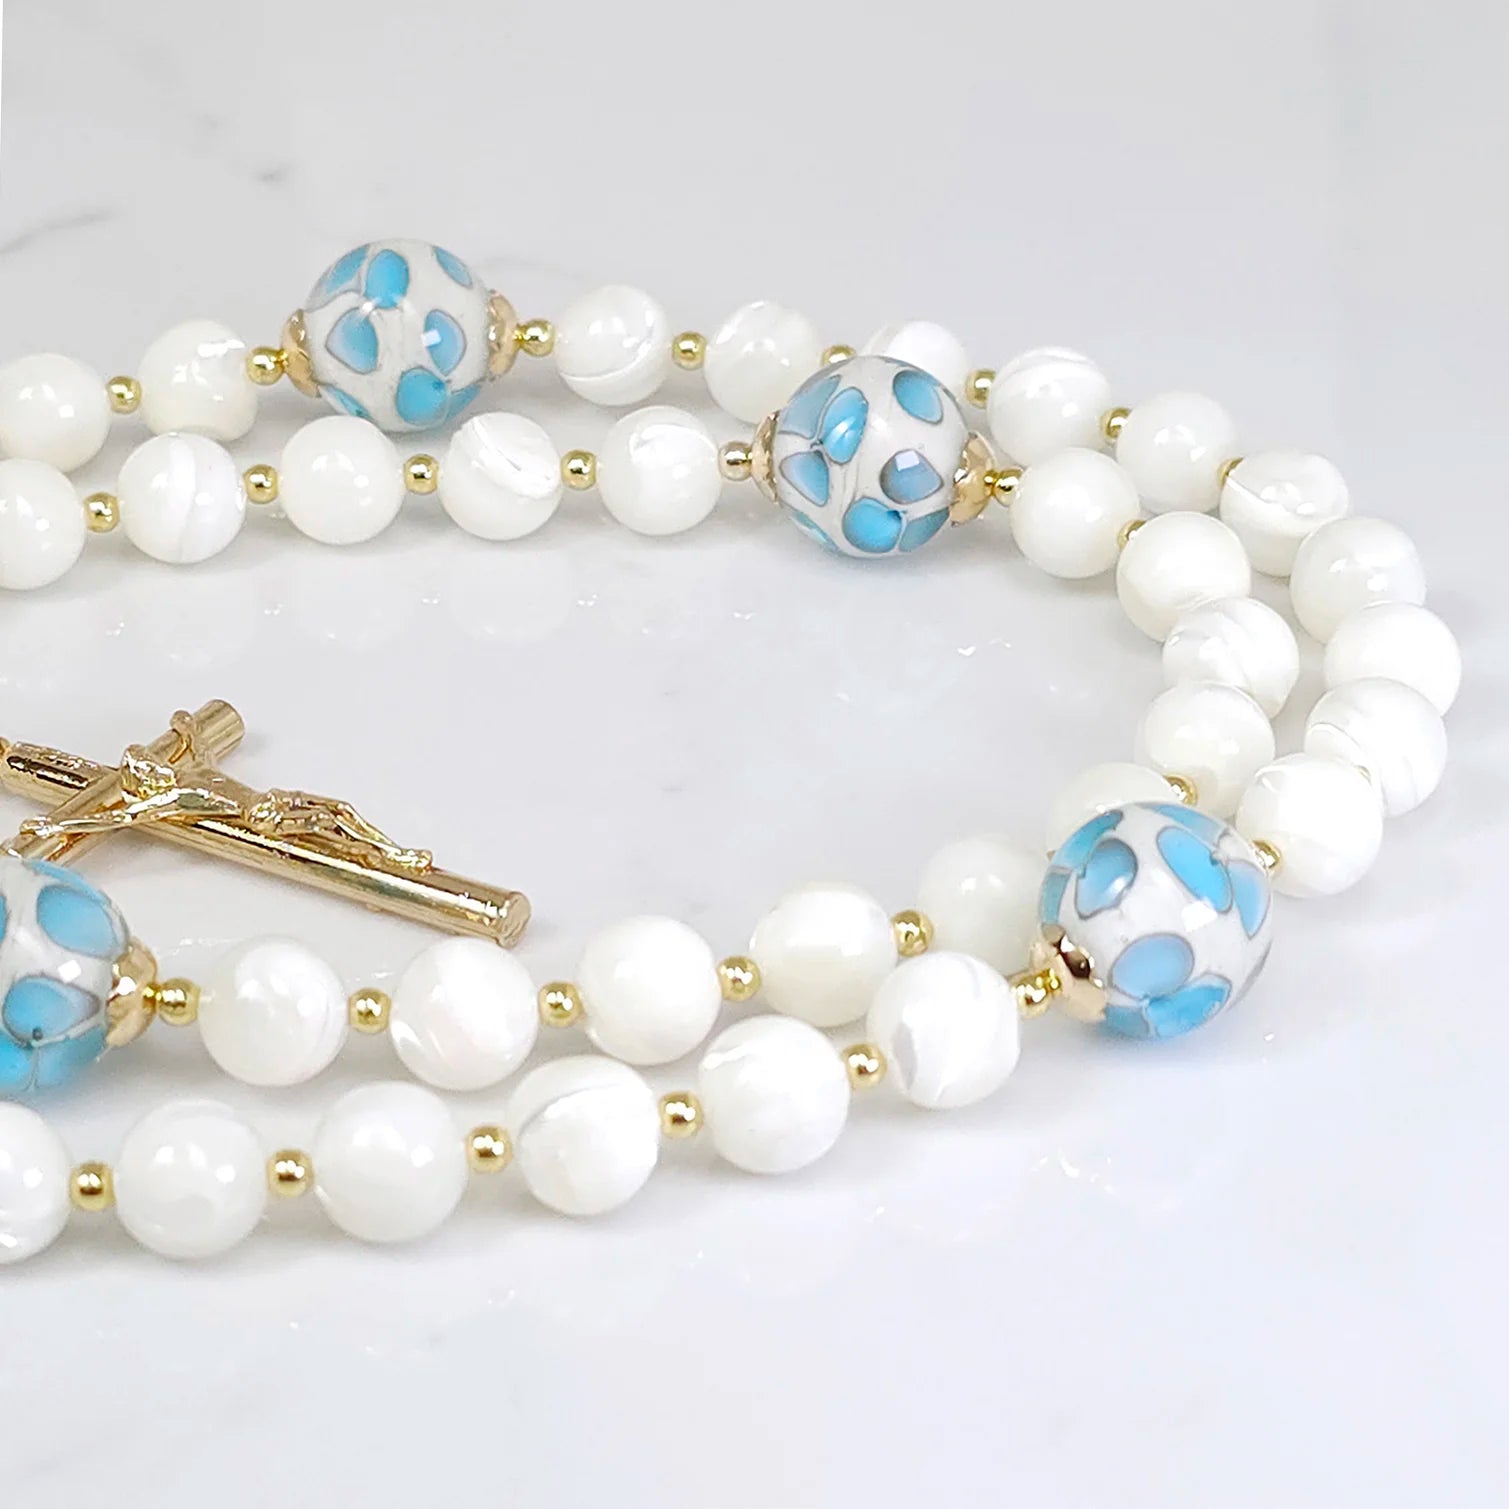 Catholic devotion rosary featuring White Mother of Pearl and little blue flower glass beads, displayed on a surface.